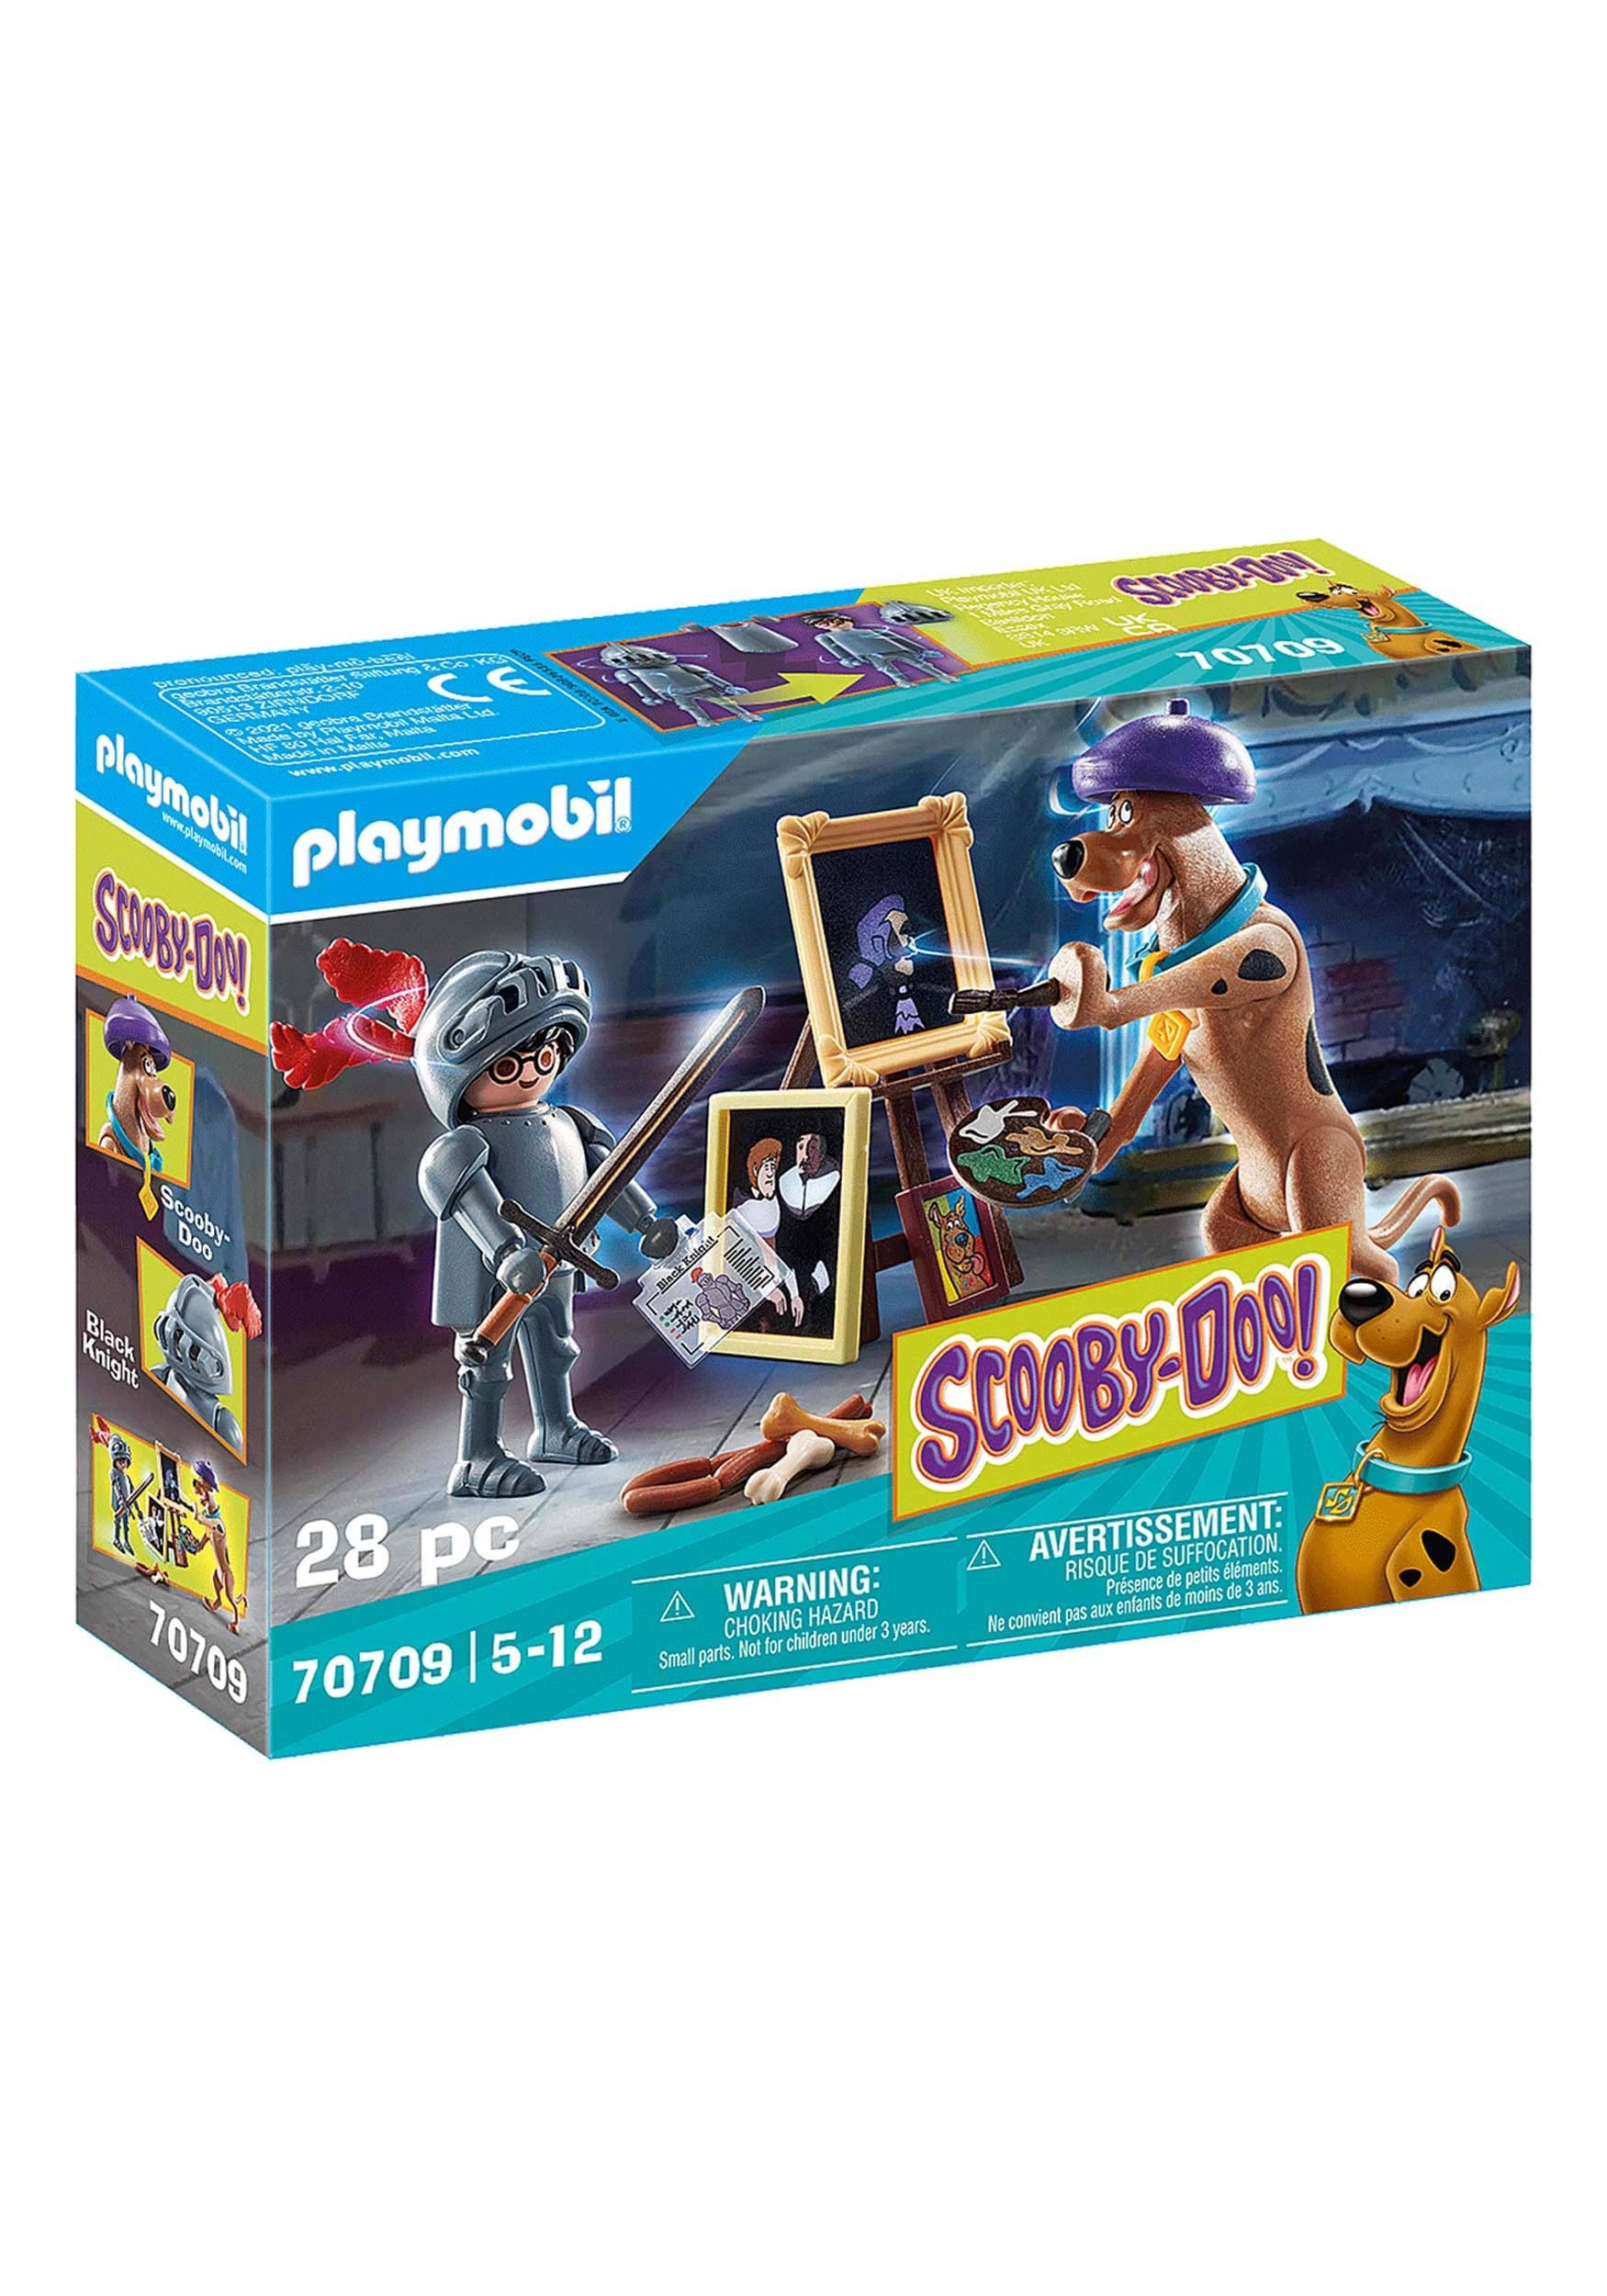 Playmobil 70709 Scooby-Doo! Adventure With Black Knight